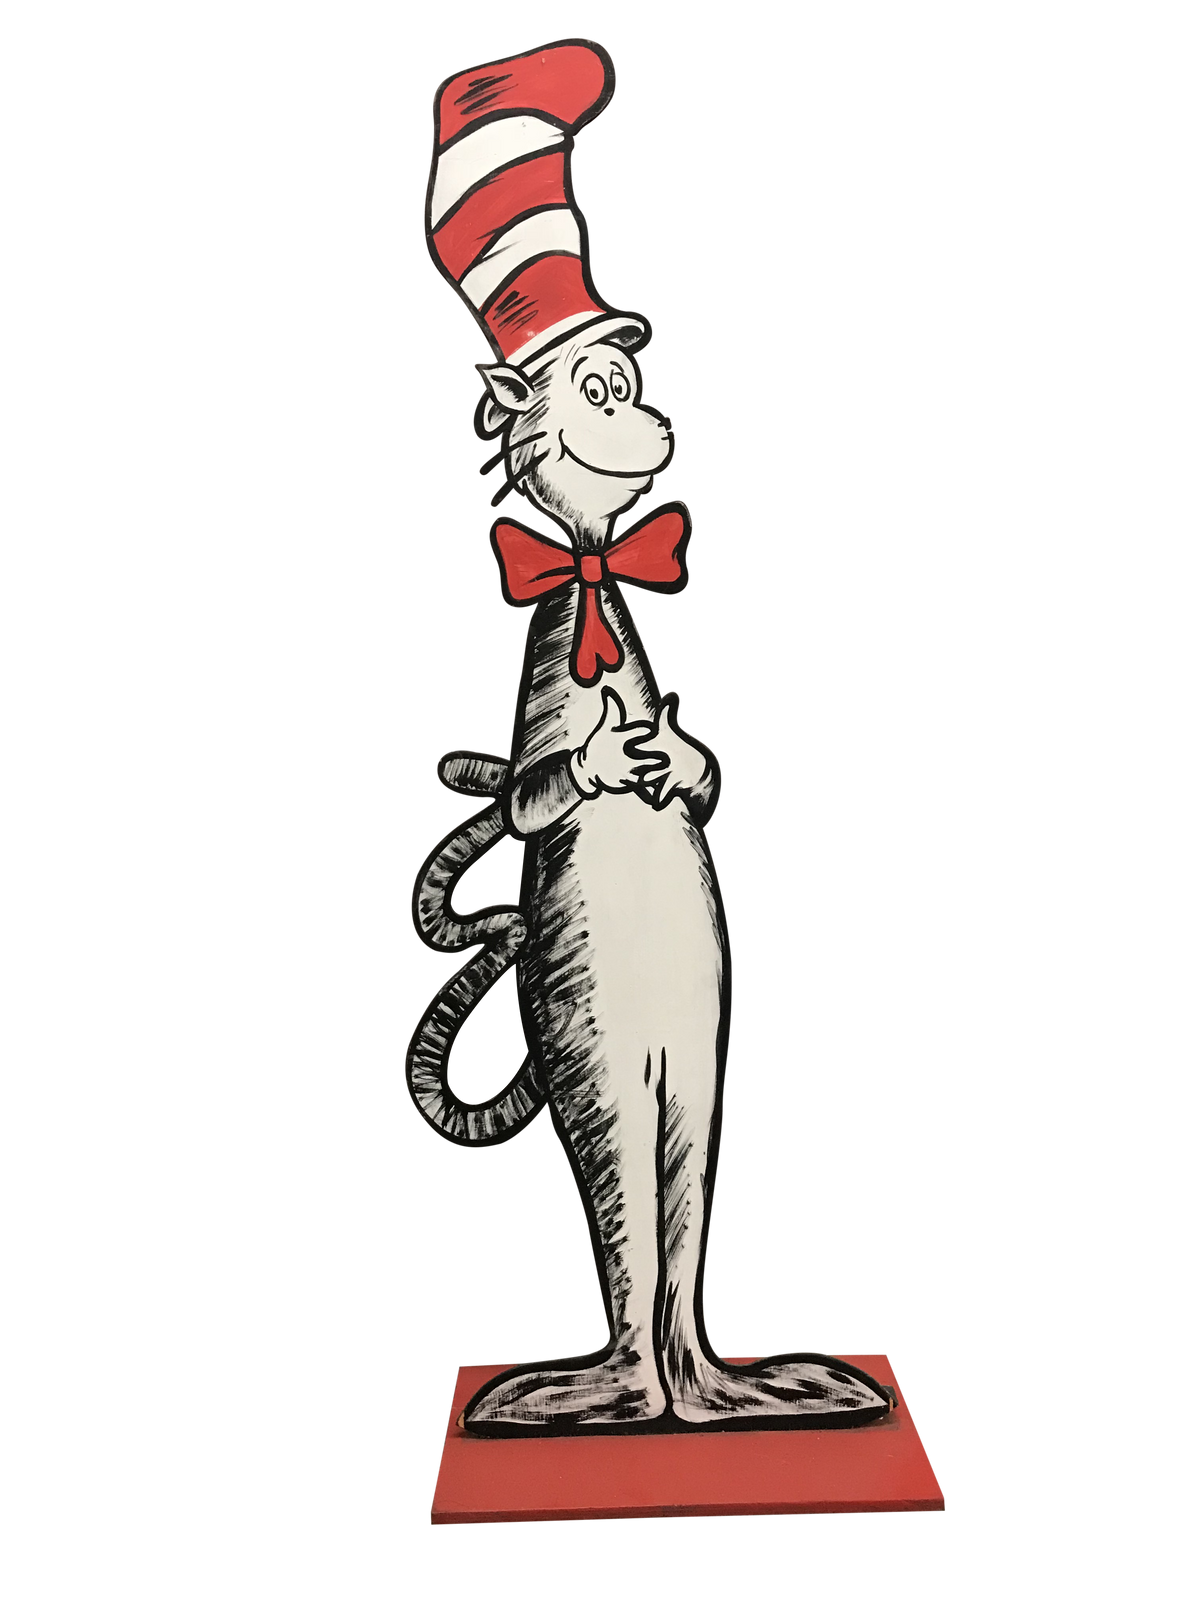 The Cat In The Hat Standee